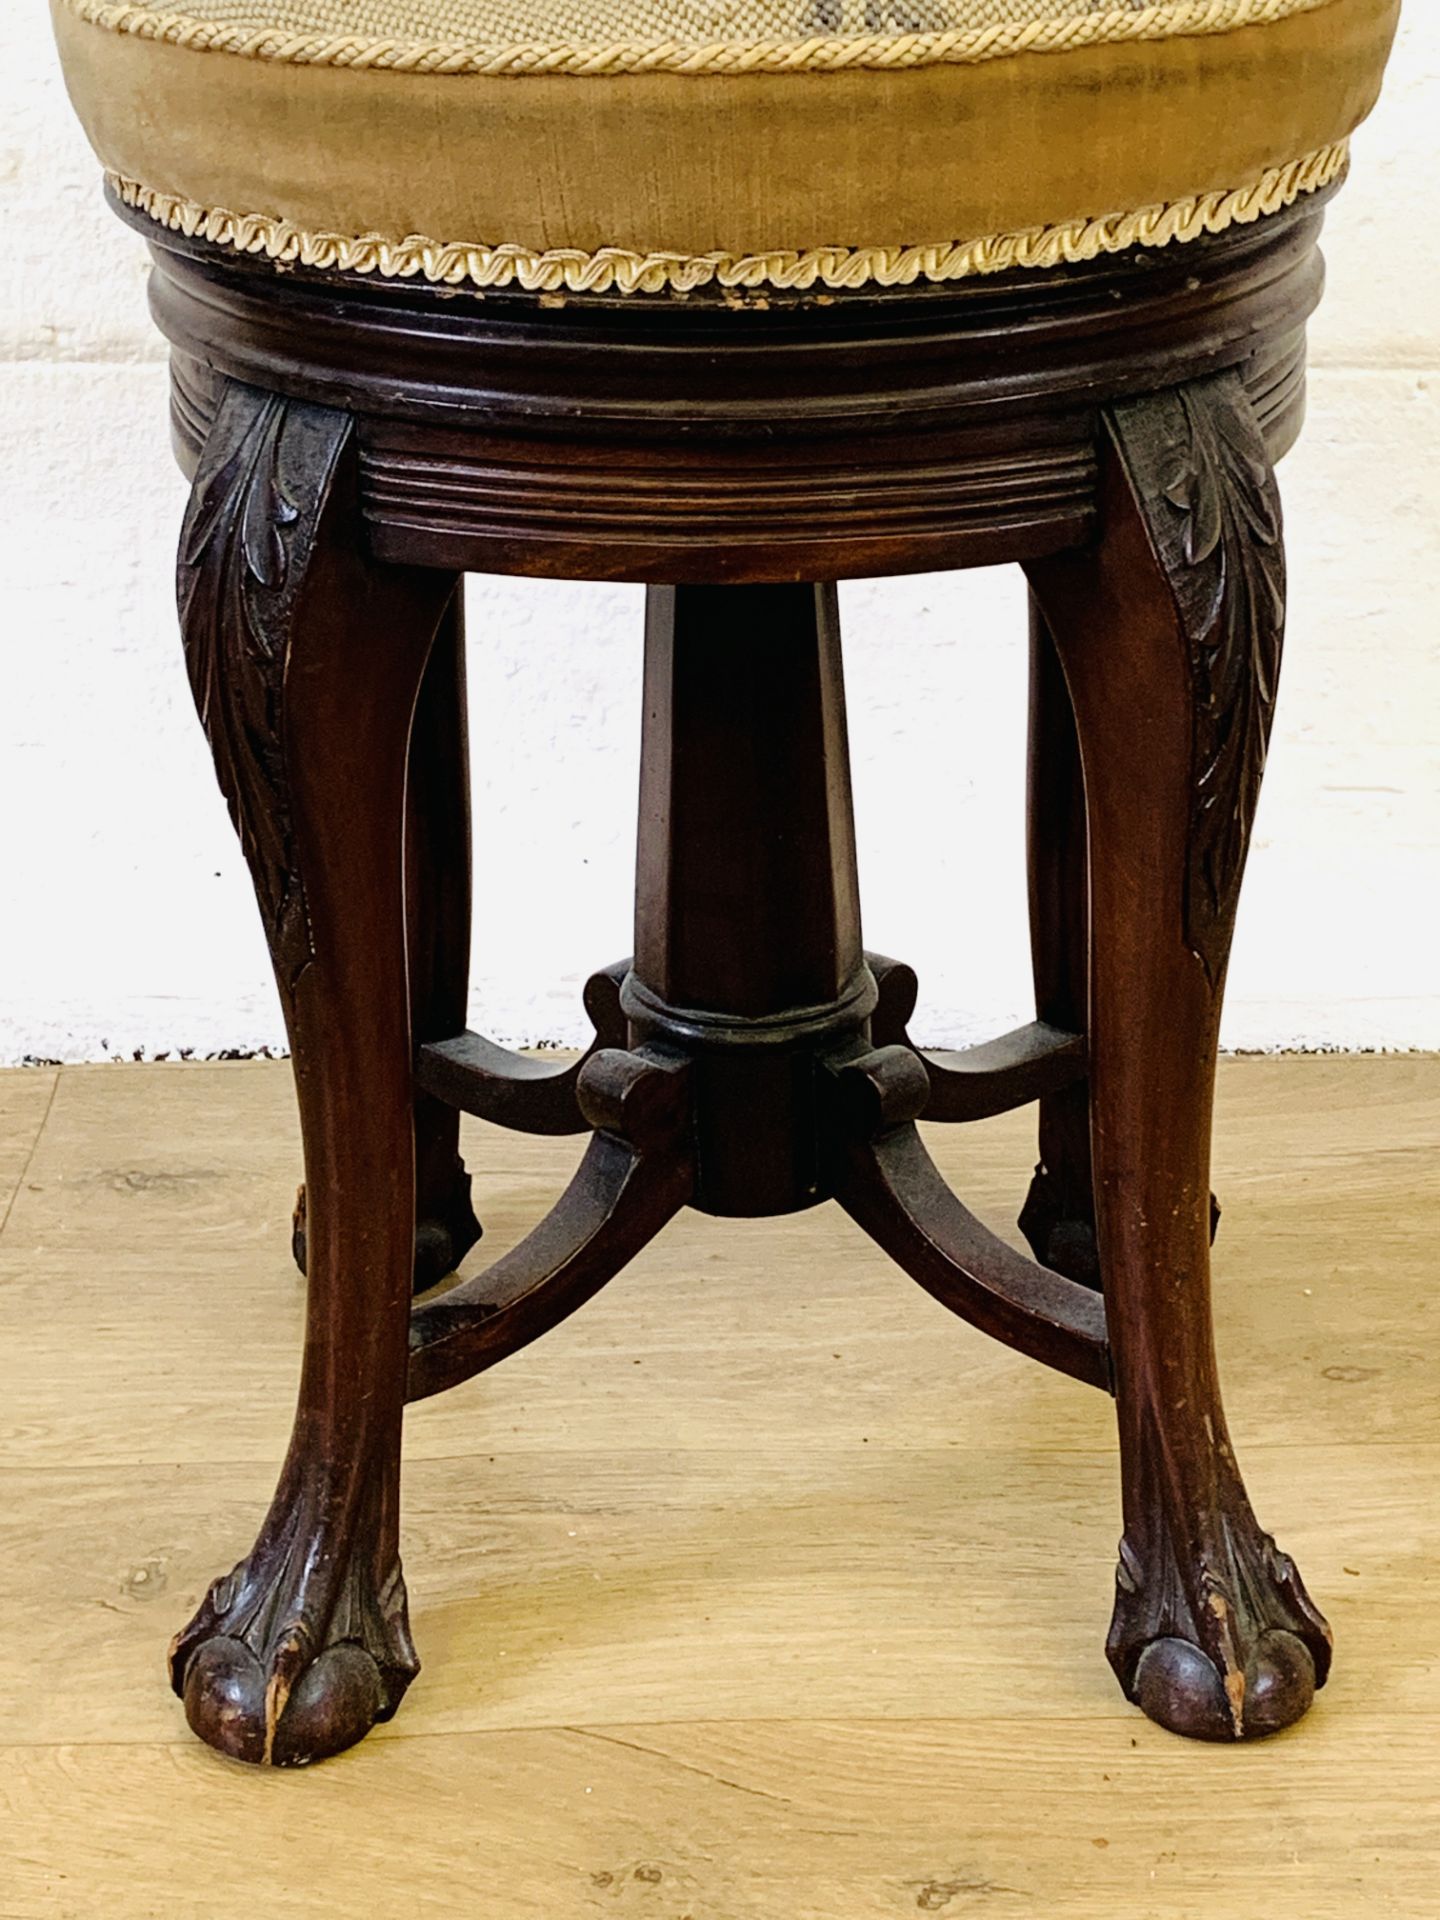 Adjustable stool with tapestry seat - Image 2 of 3